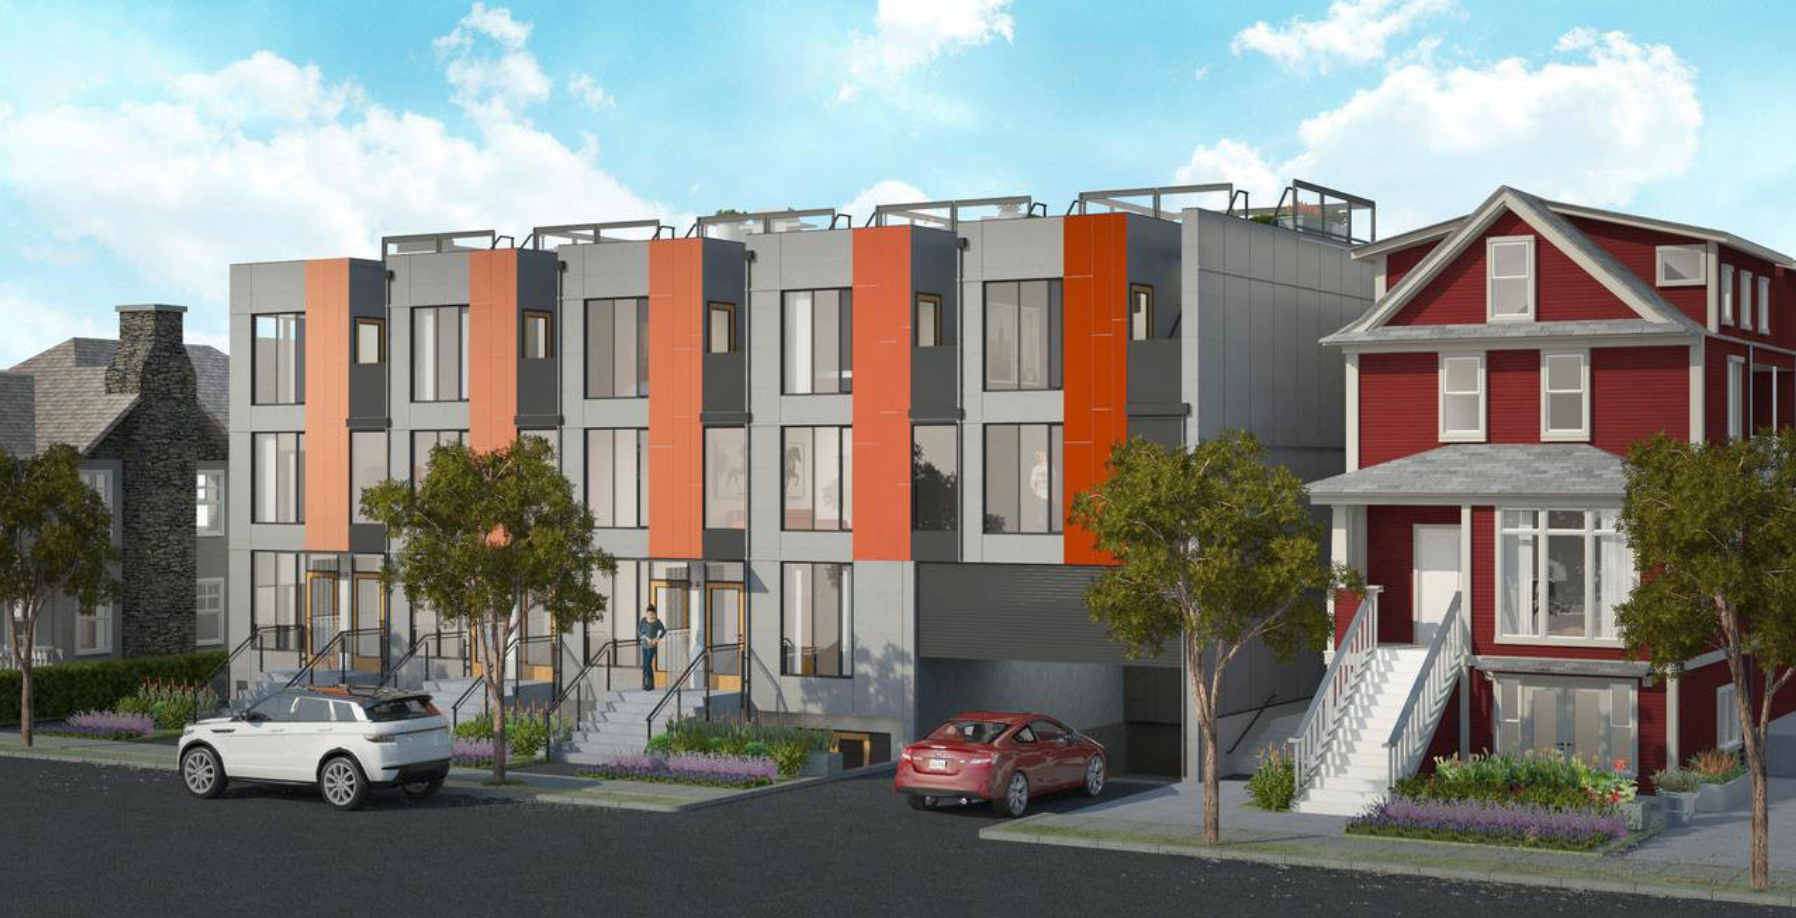 Main Photo: 531 E. 16th Avenue in Mount Pleasant VE - Vancouver: Number of Units: 21 Multifamily for sale () 